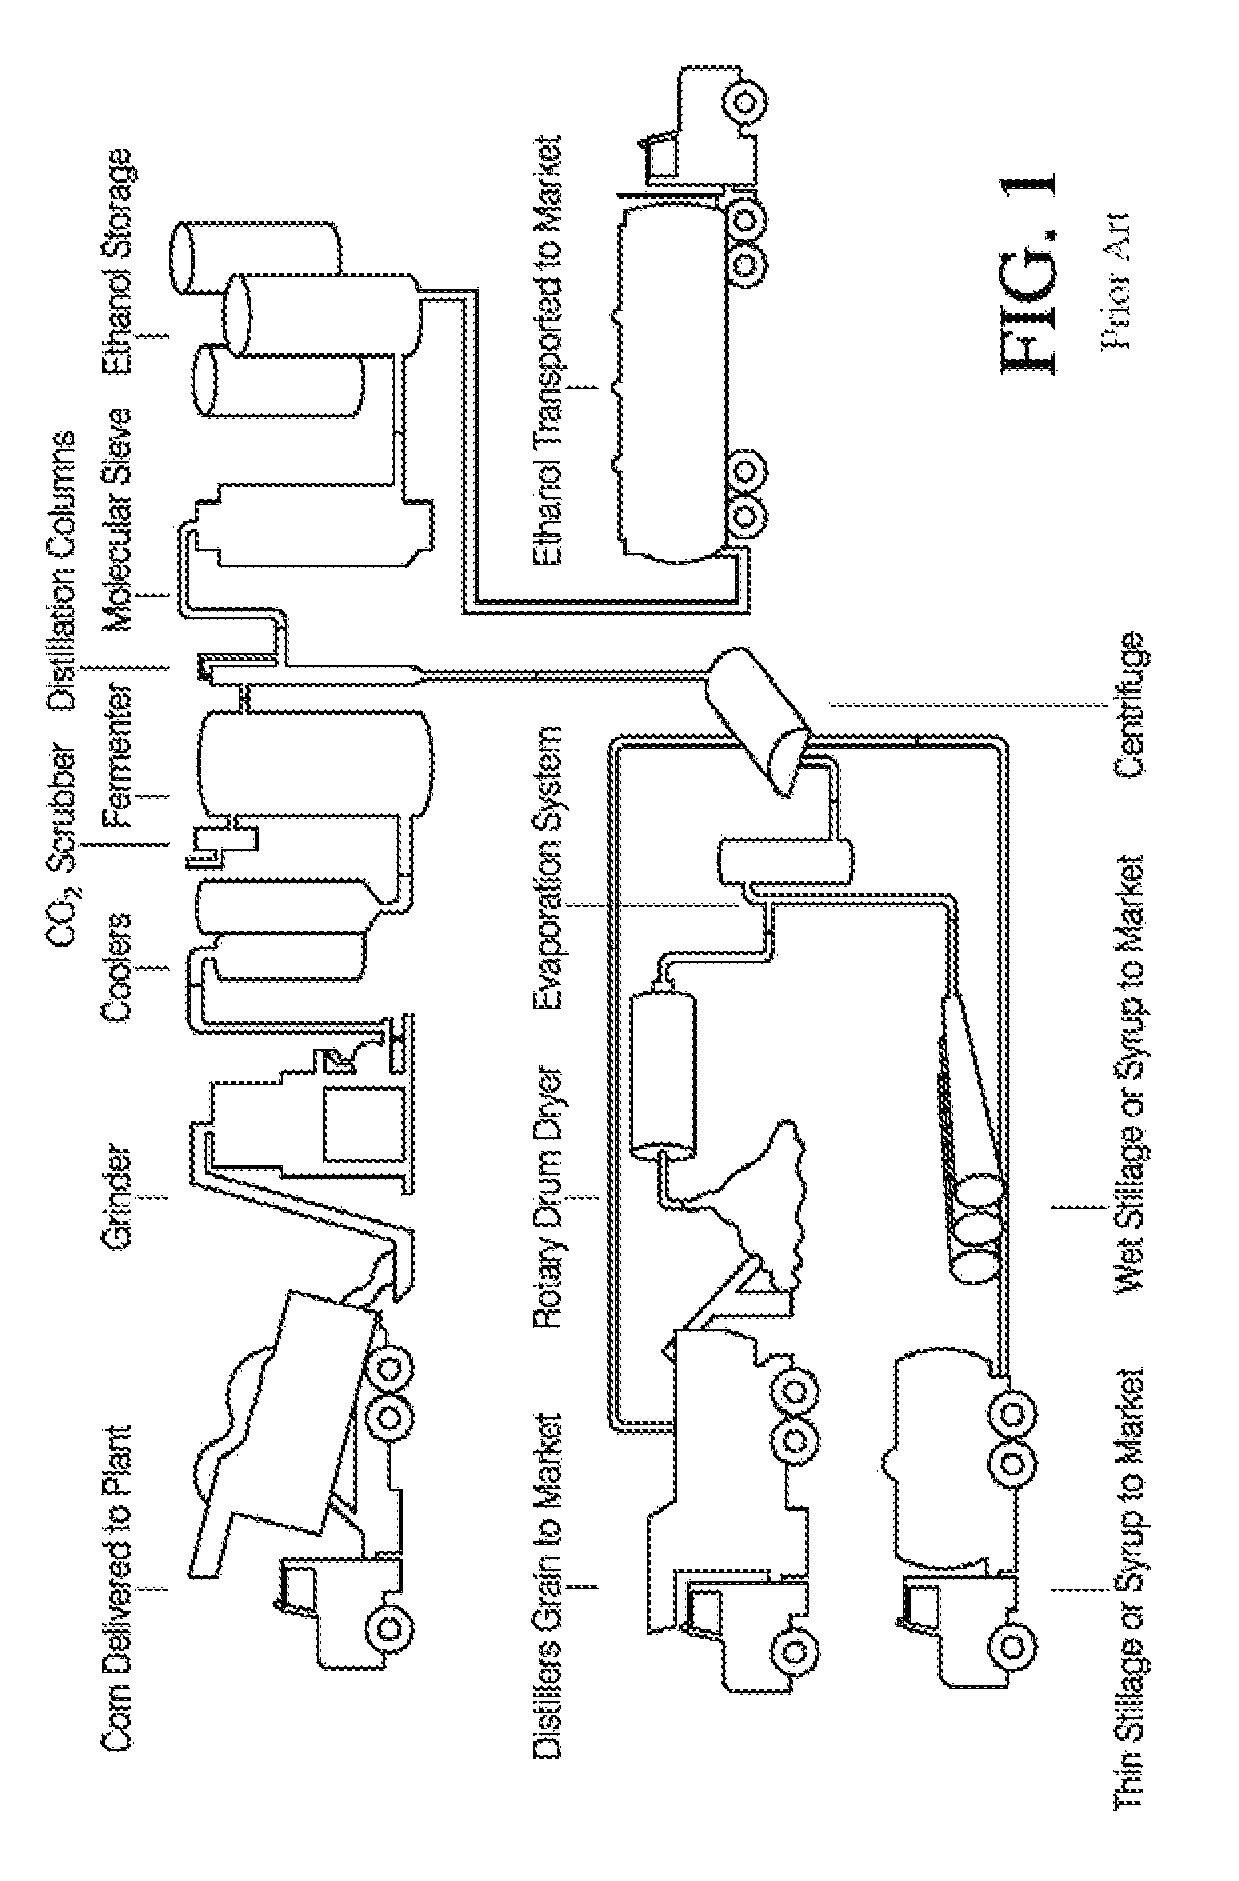 Method of producing dried distillers grain agglomerated particles